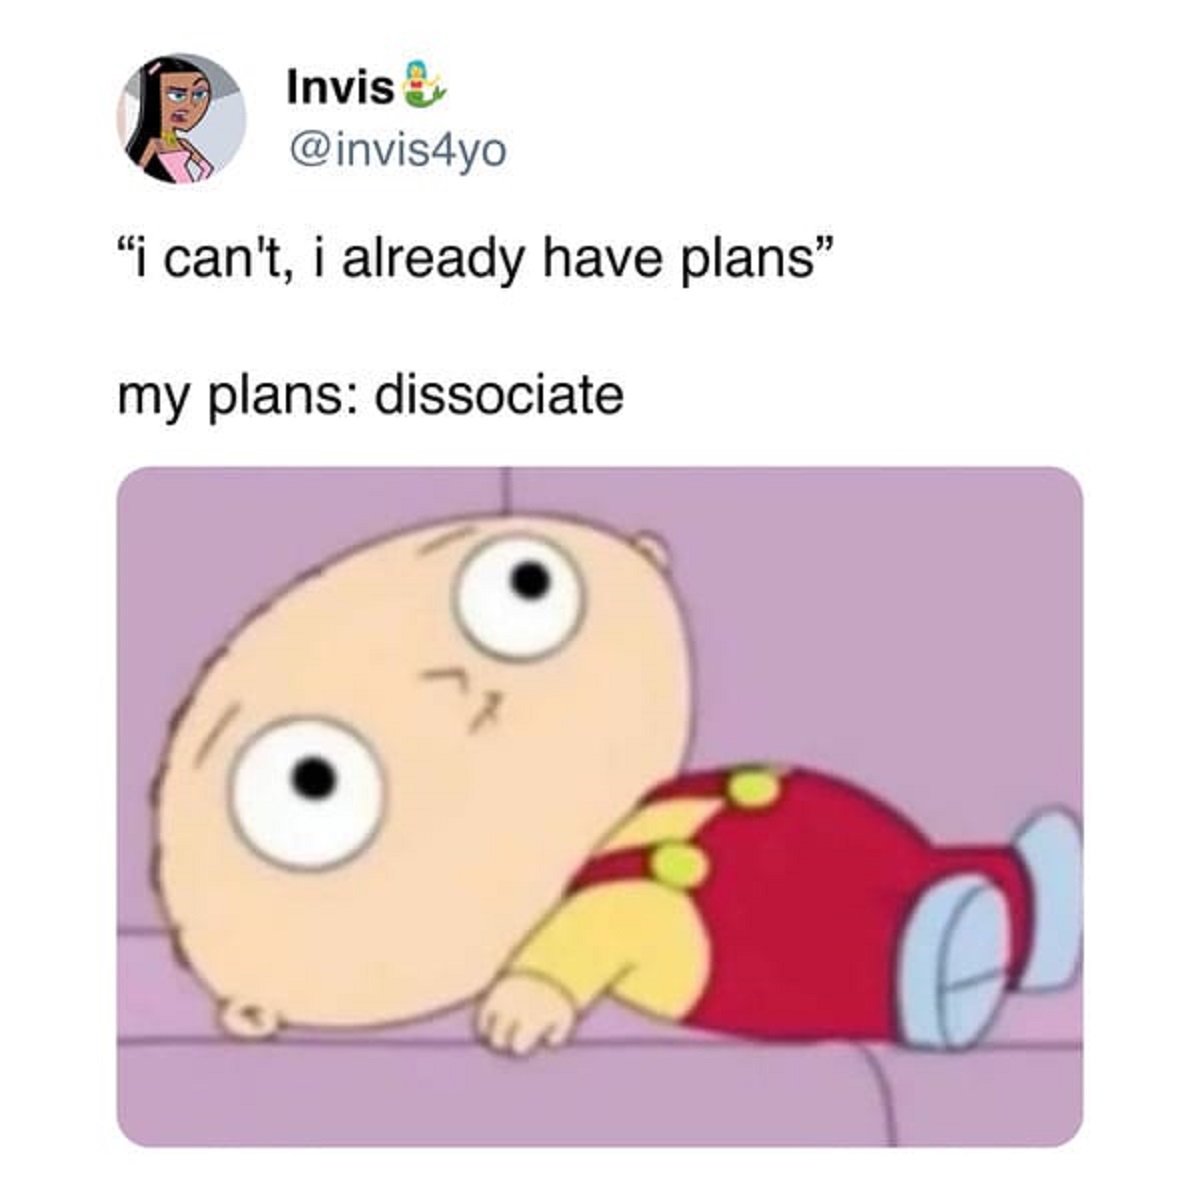 cartoon - Invis "i can't, i already have plans" my plans dissociate